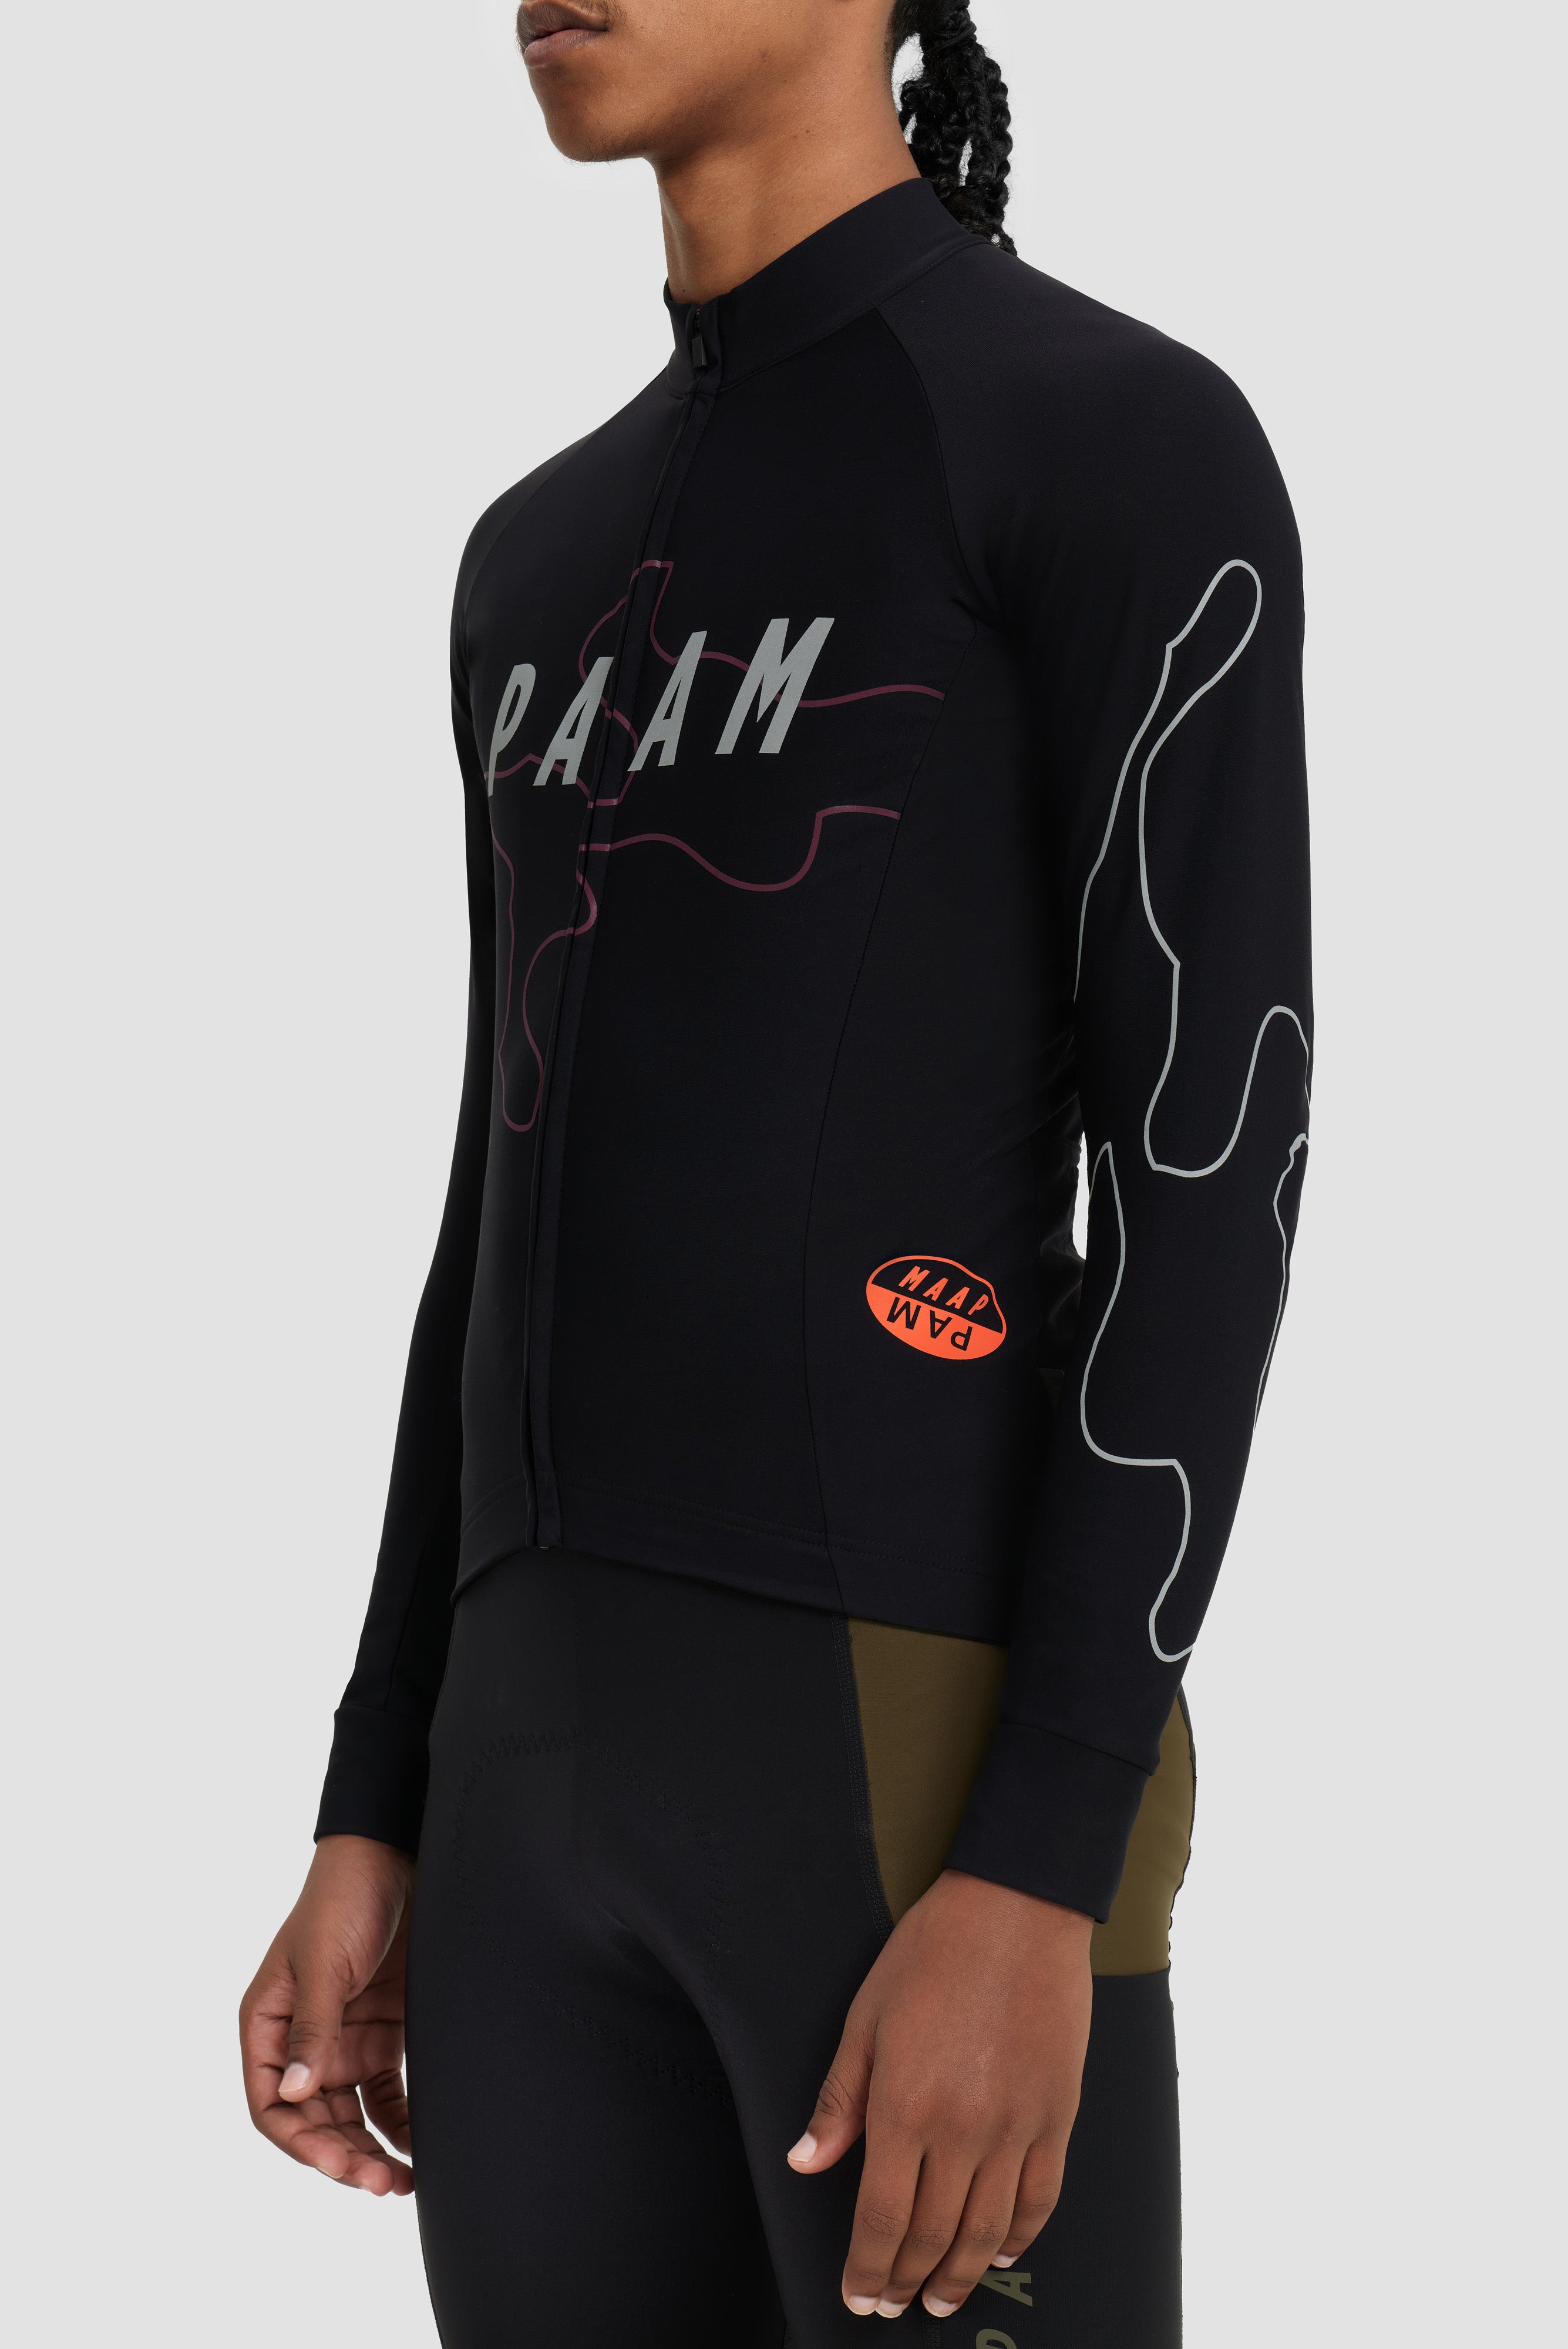 The PAAM 2.0 THERMAL L/S JERSEY  available online with global shipping, and in PAM Stores Melbourne and Sydney.